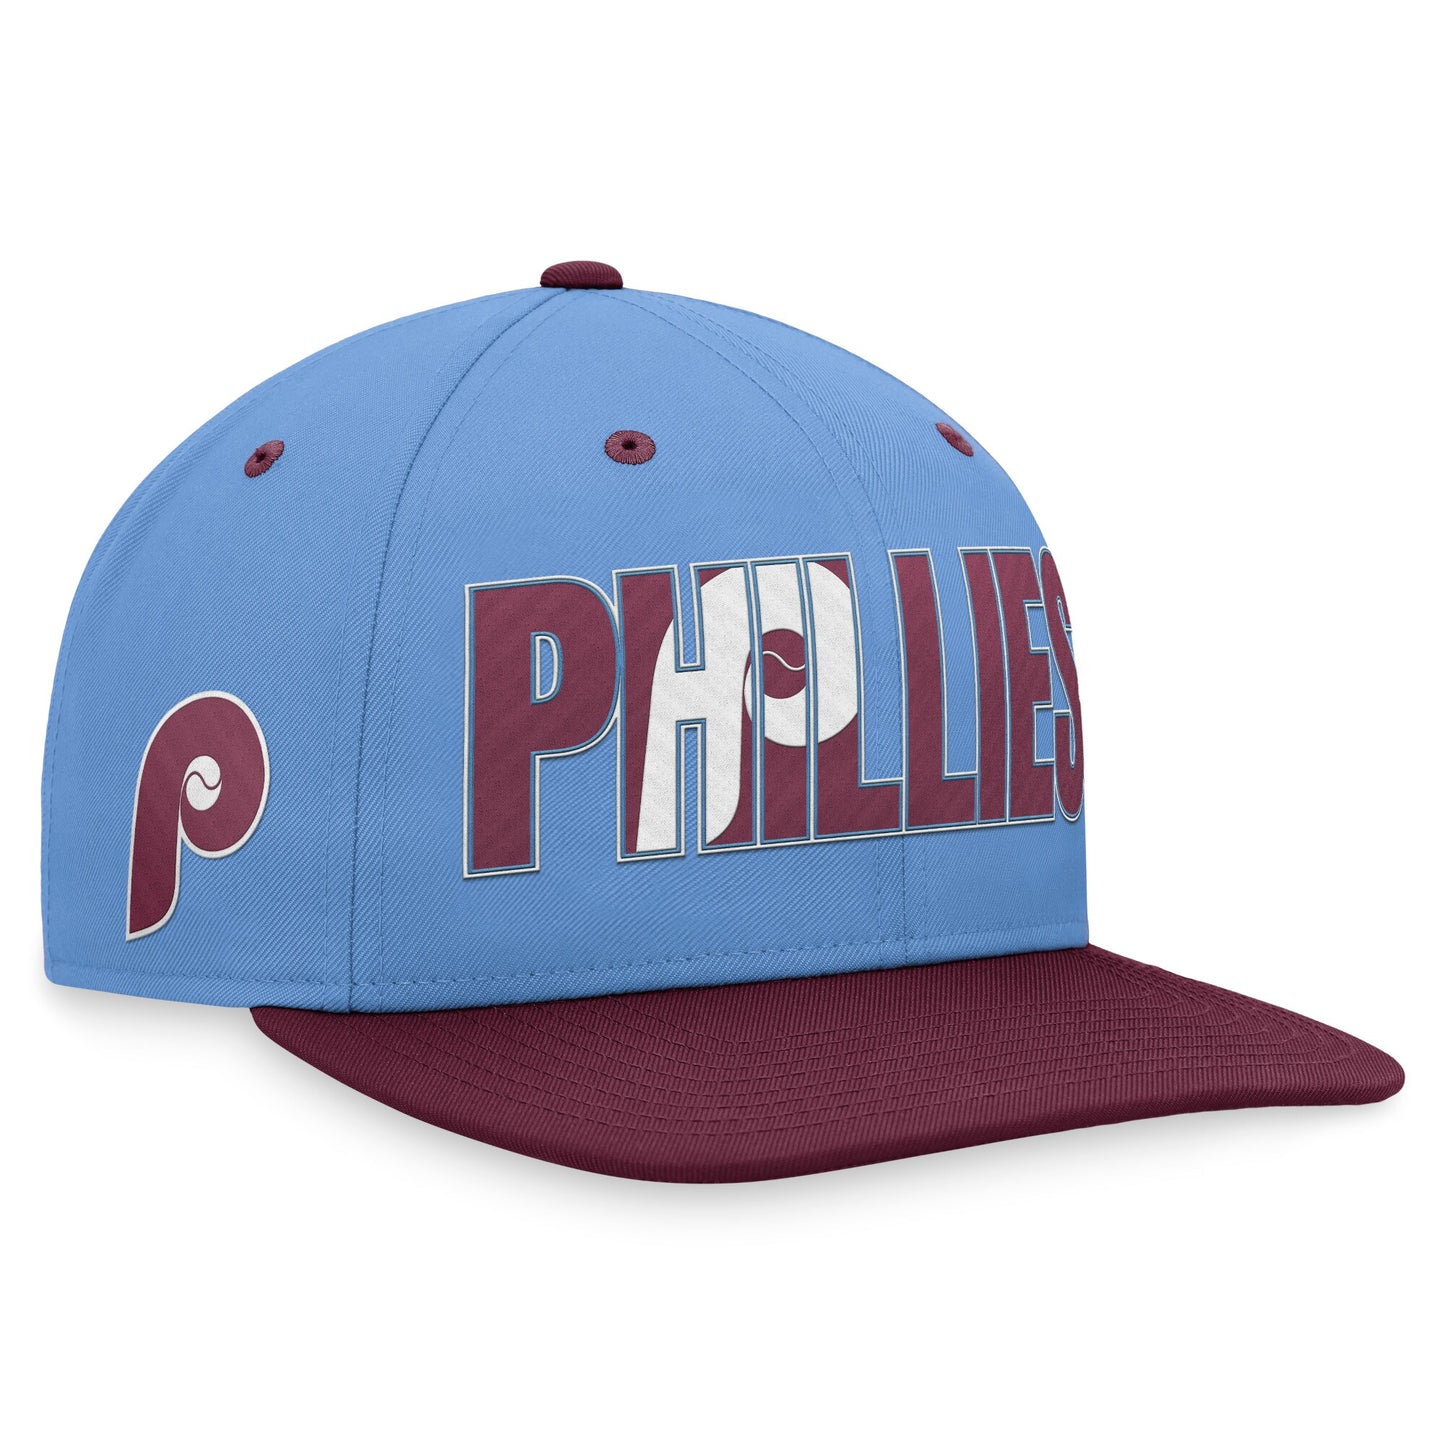 Philadelphia Phillies Nike Cooperstown Collection Pro Snapback Hat - Light Blue